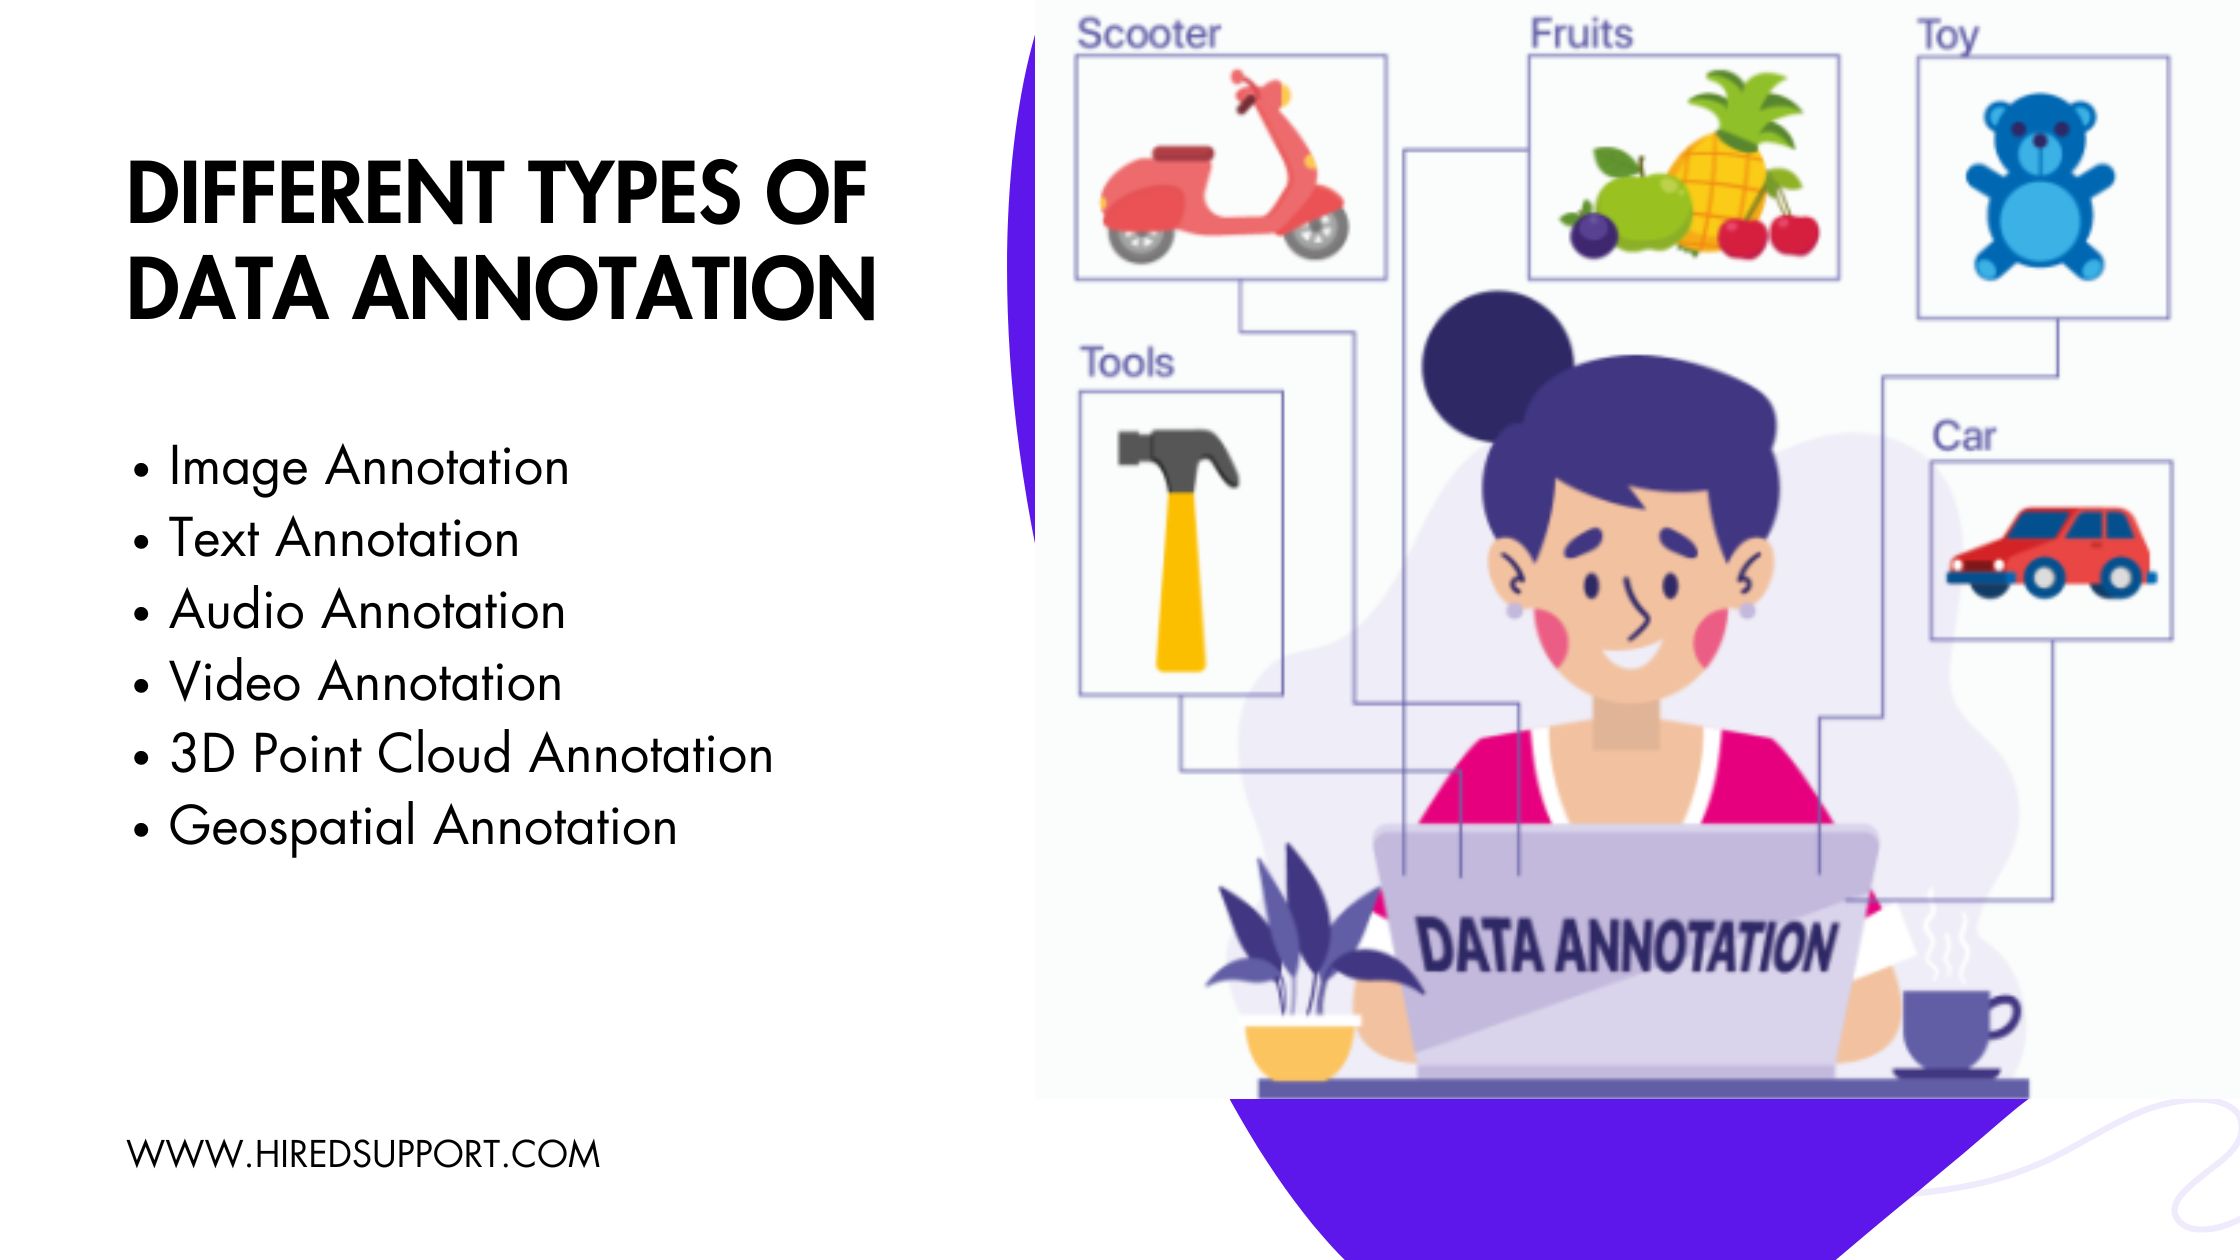 Different Types of Data Annotation